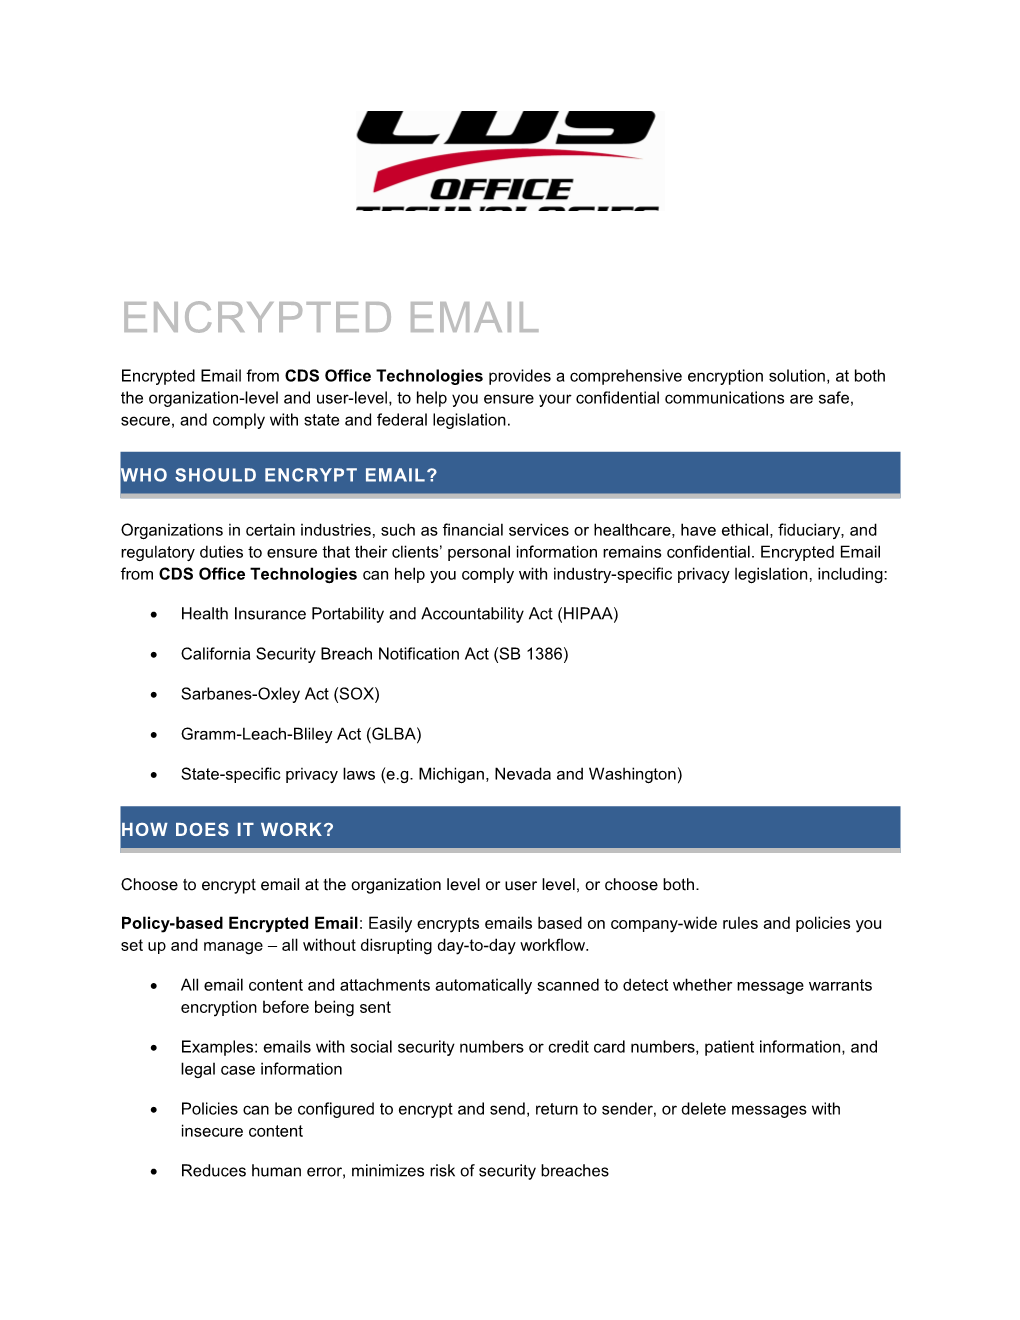 Who Should Encrypt Email?